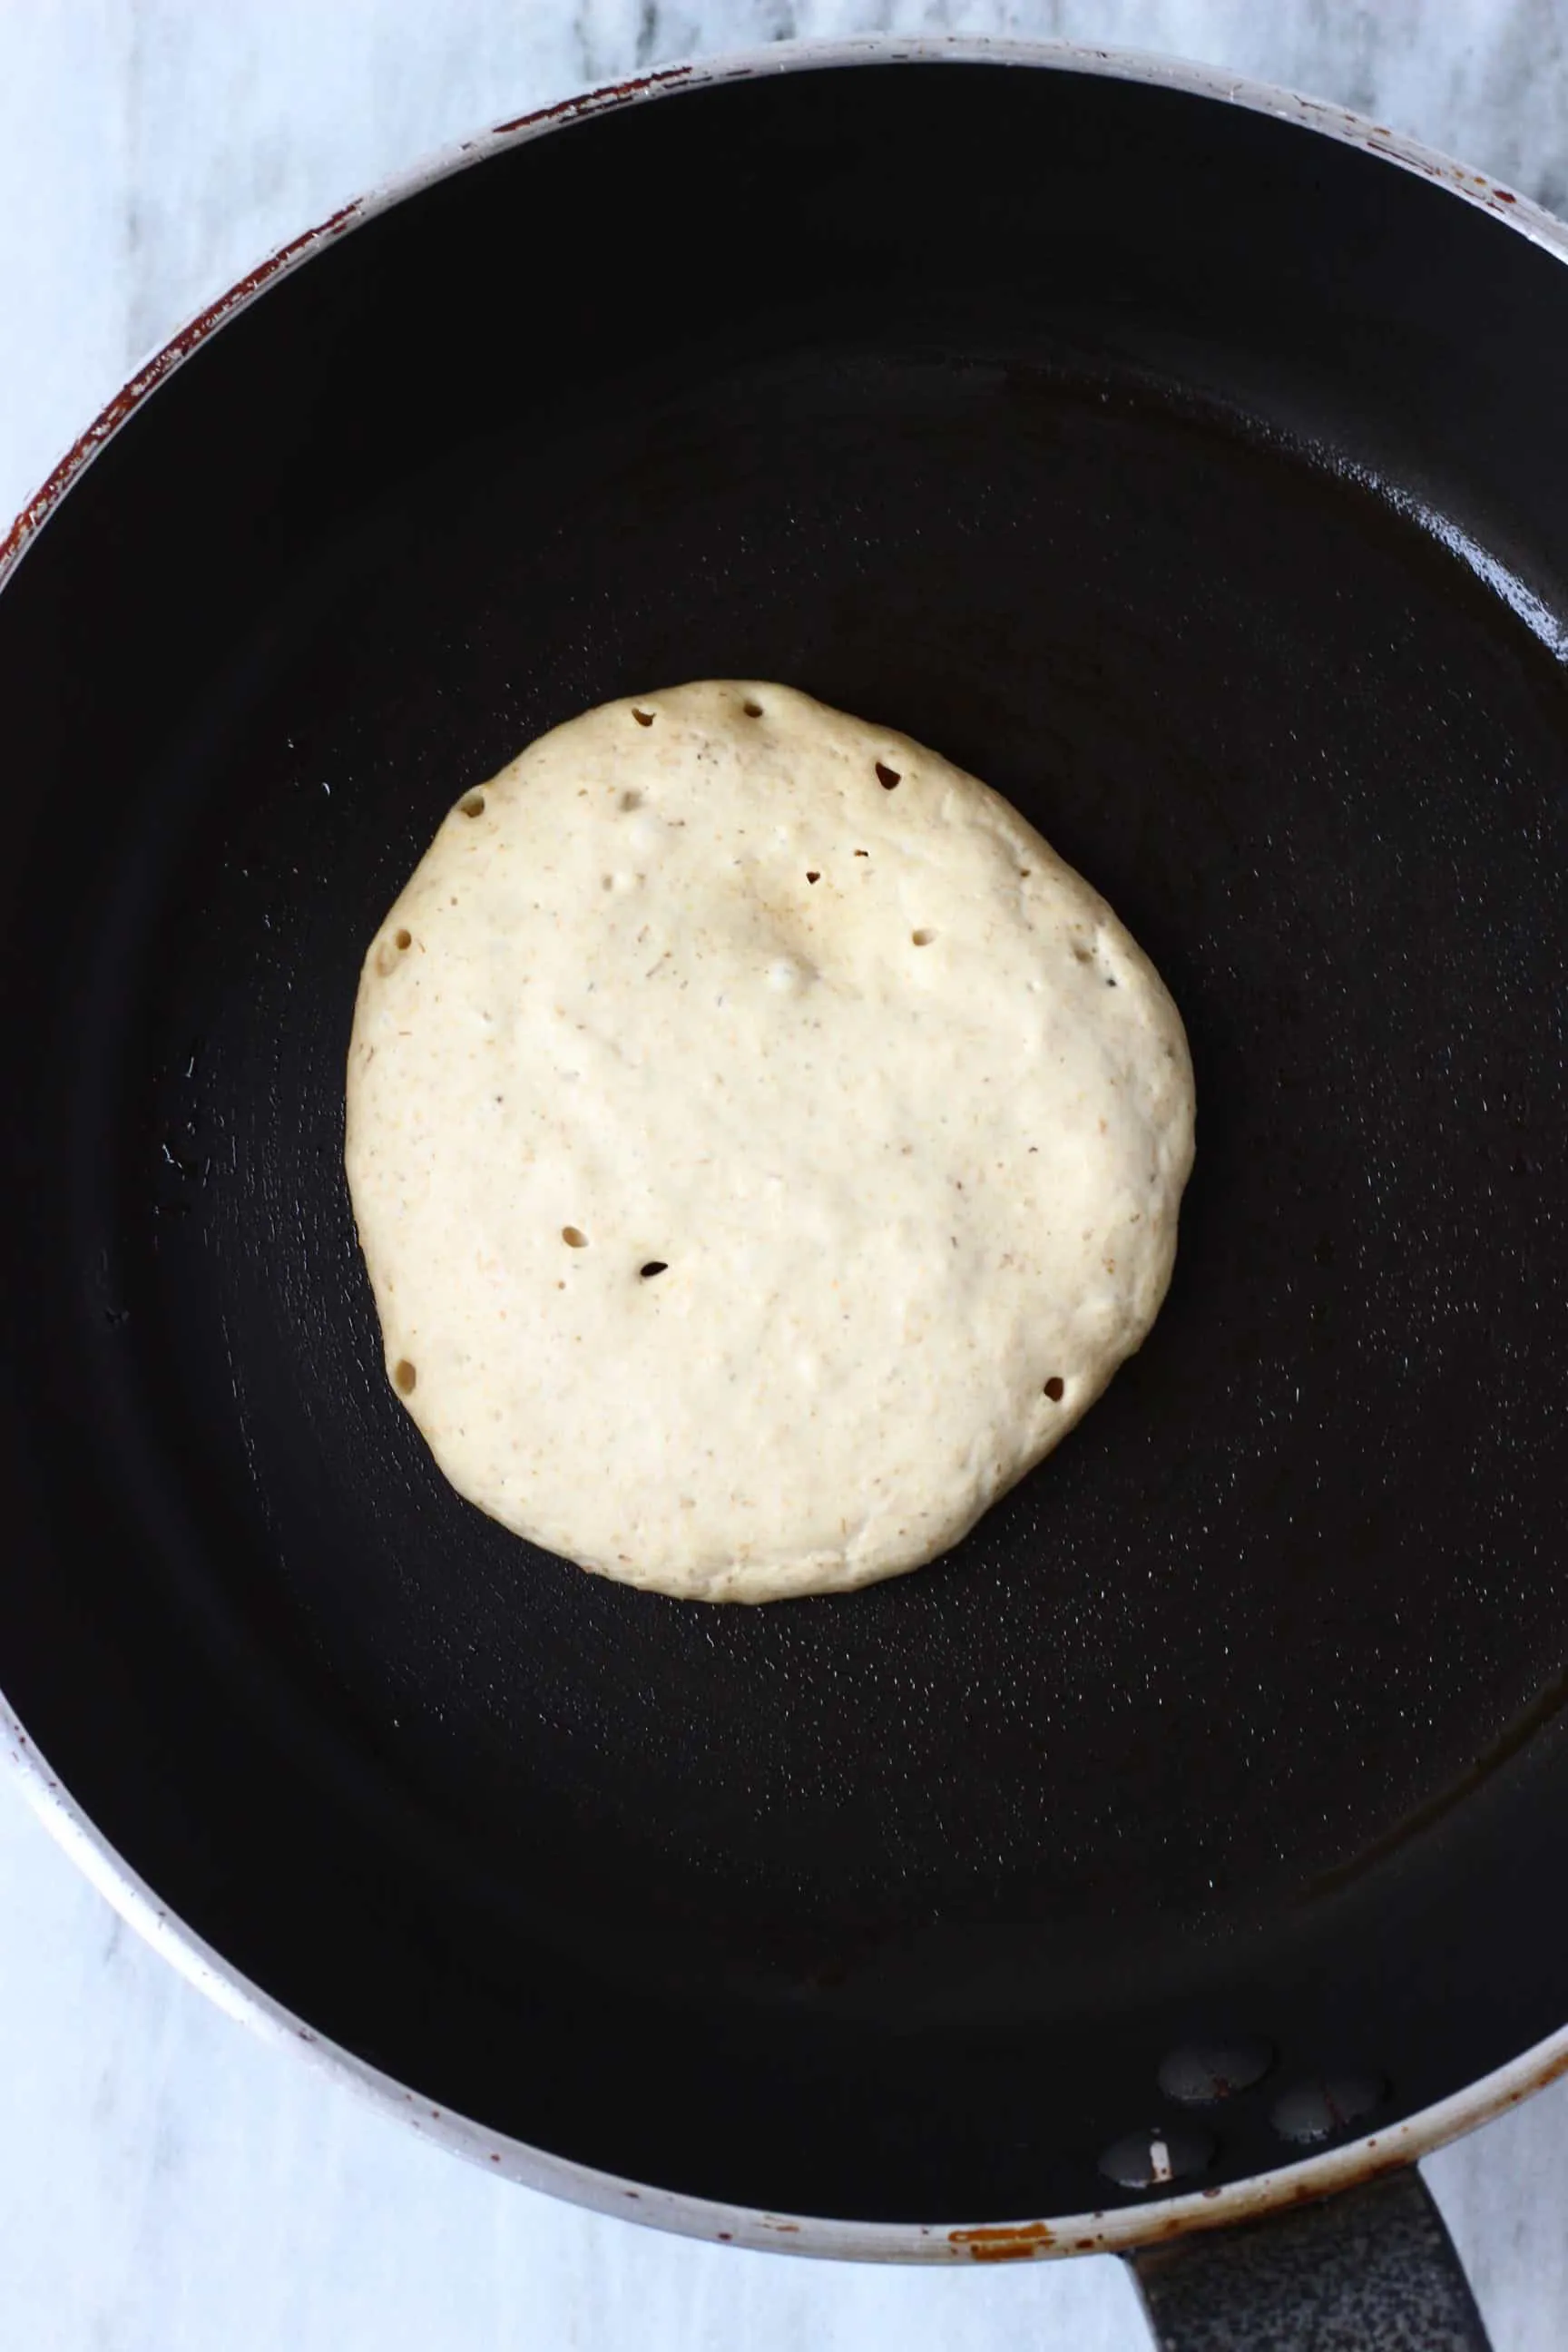 A raw banana oatmeal pancake being cooked in a black frying pan against a marble background